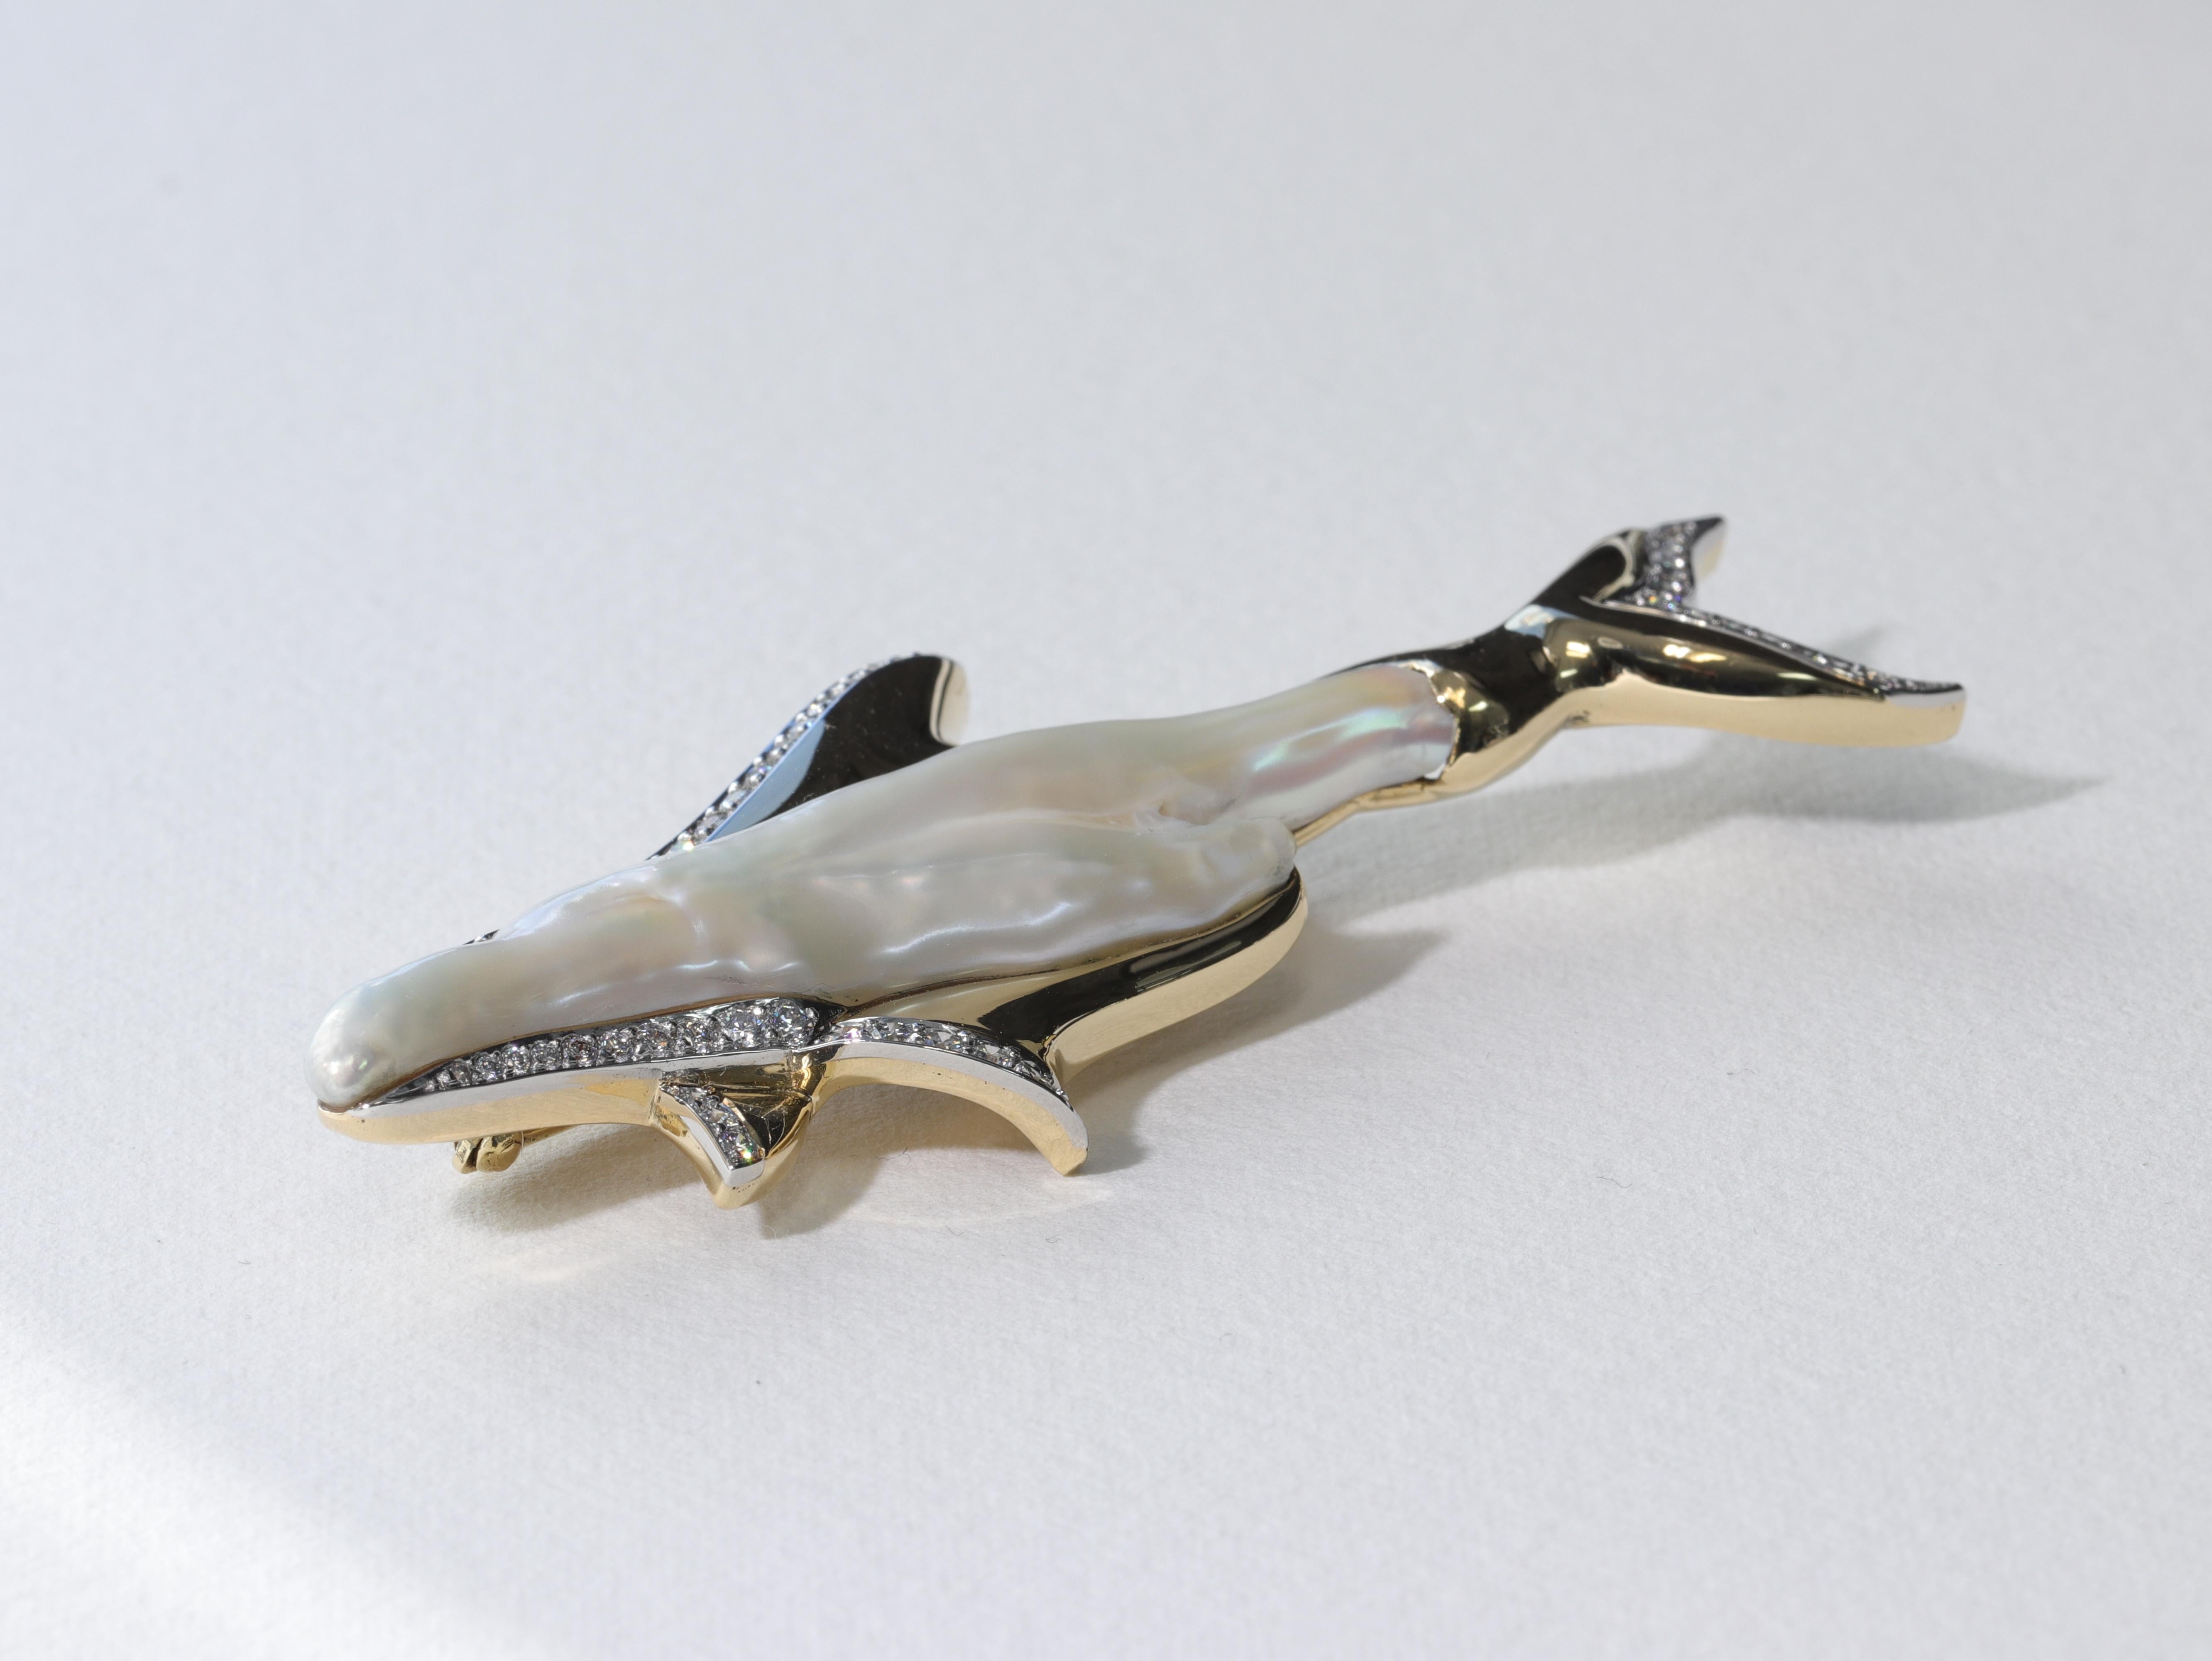 This truly one of a kind Tiffany & Co. brooch features a baroque natural pearl as the central design feature emulating the body and nose of a dolphin with additional features masterfully crafted in 18 karat yellow gold, platinum and colorless